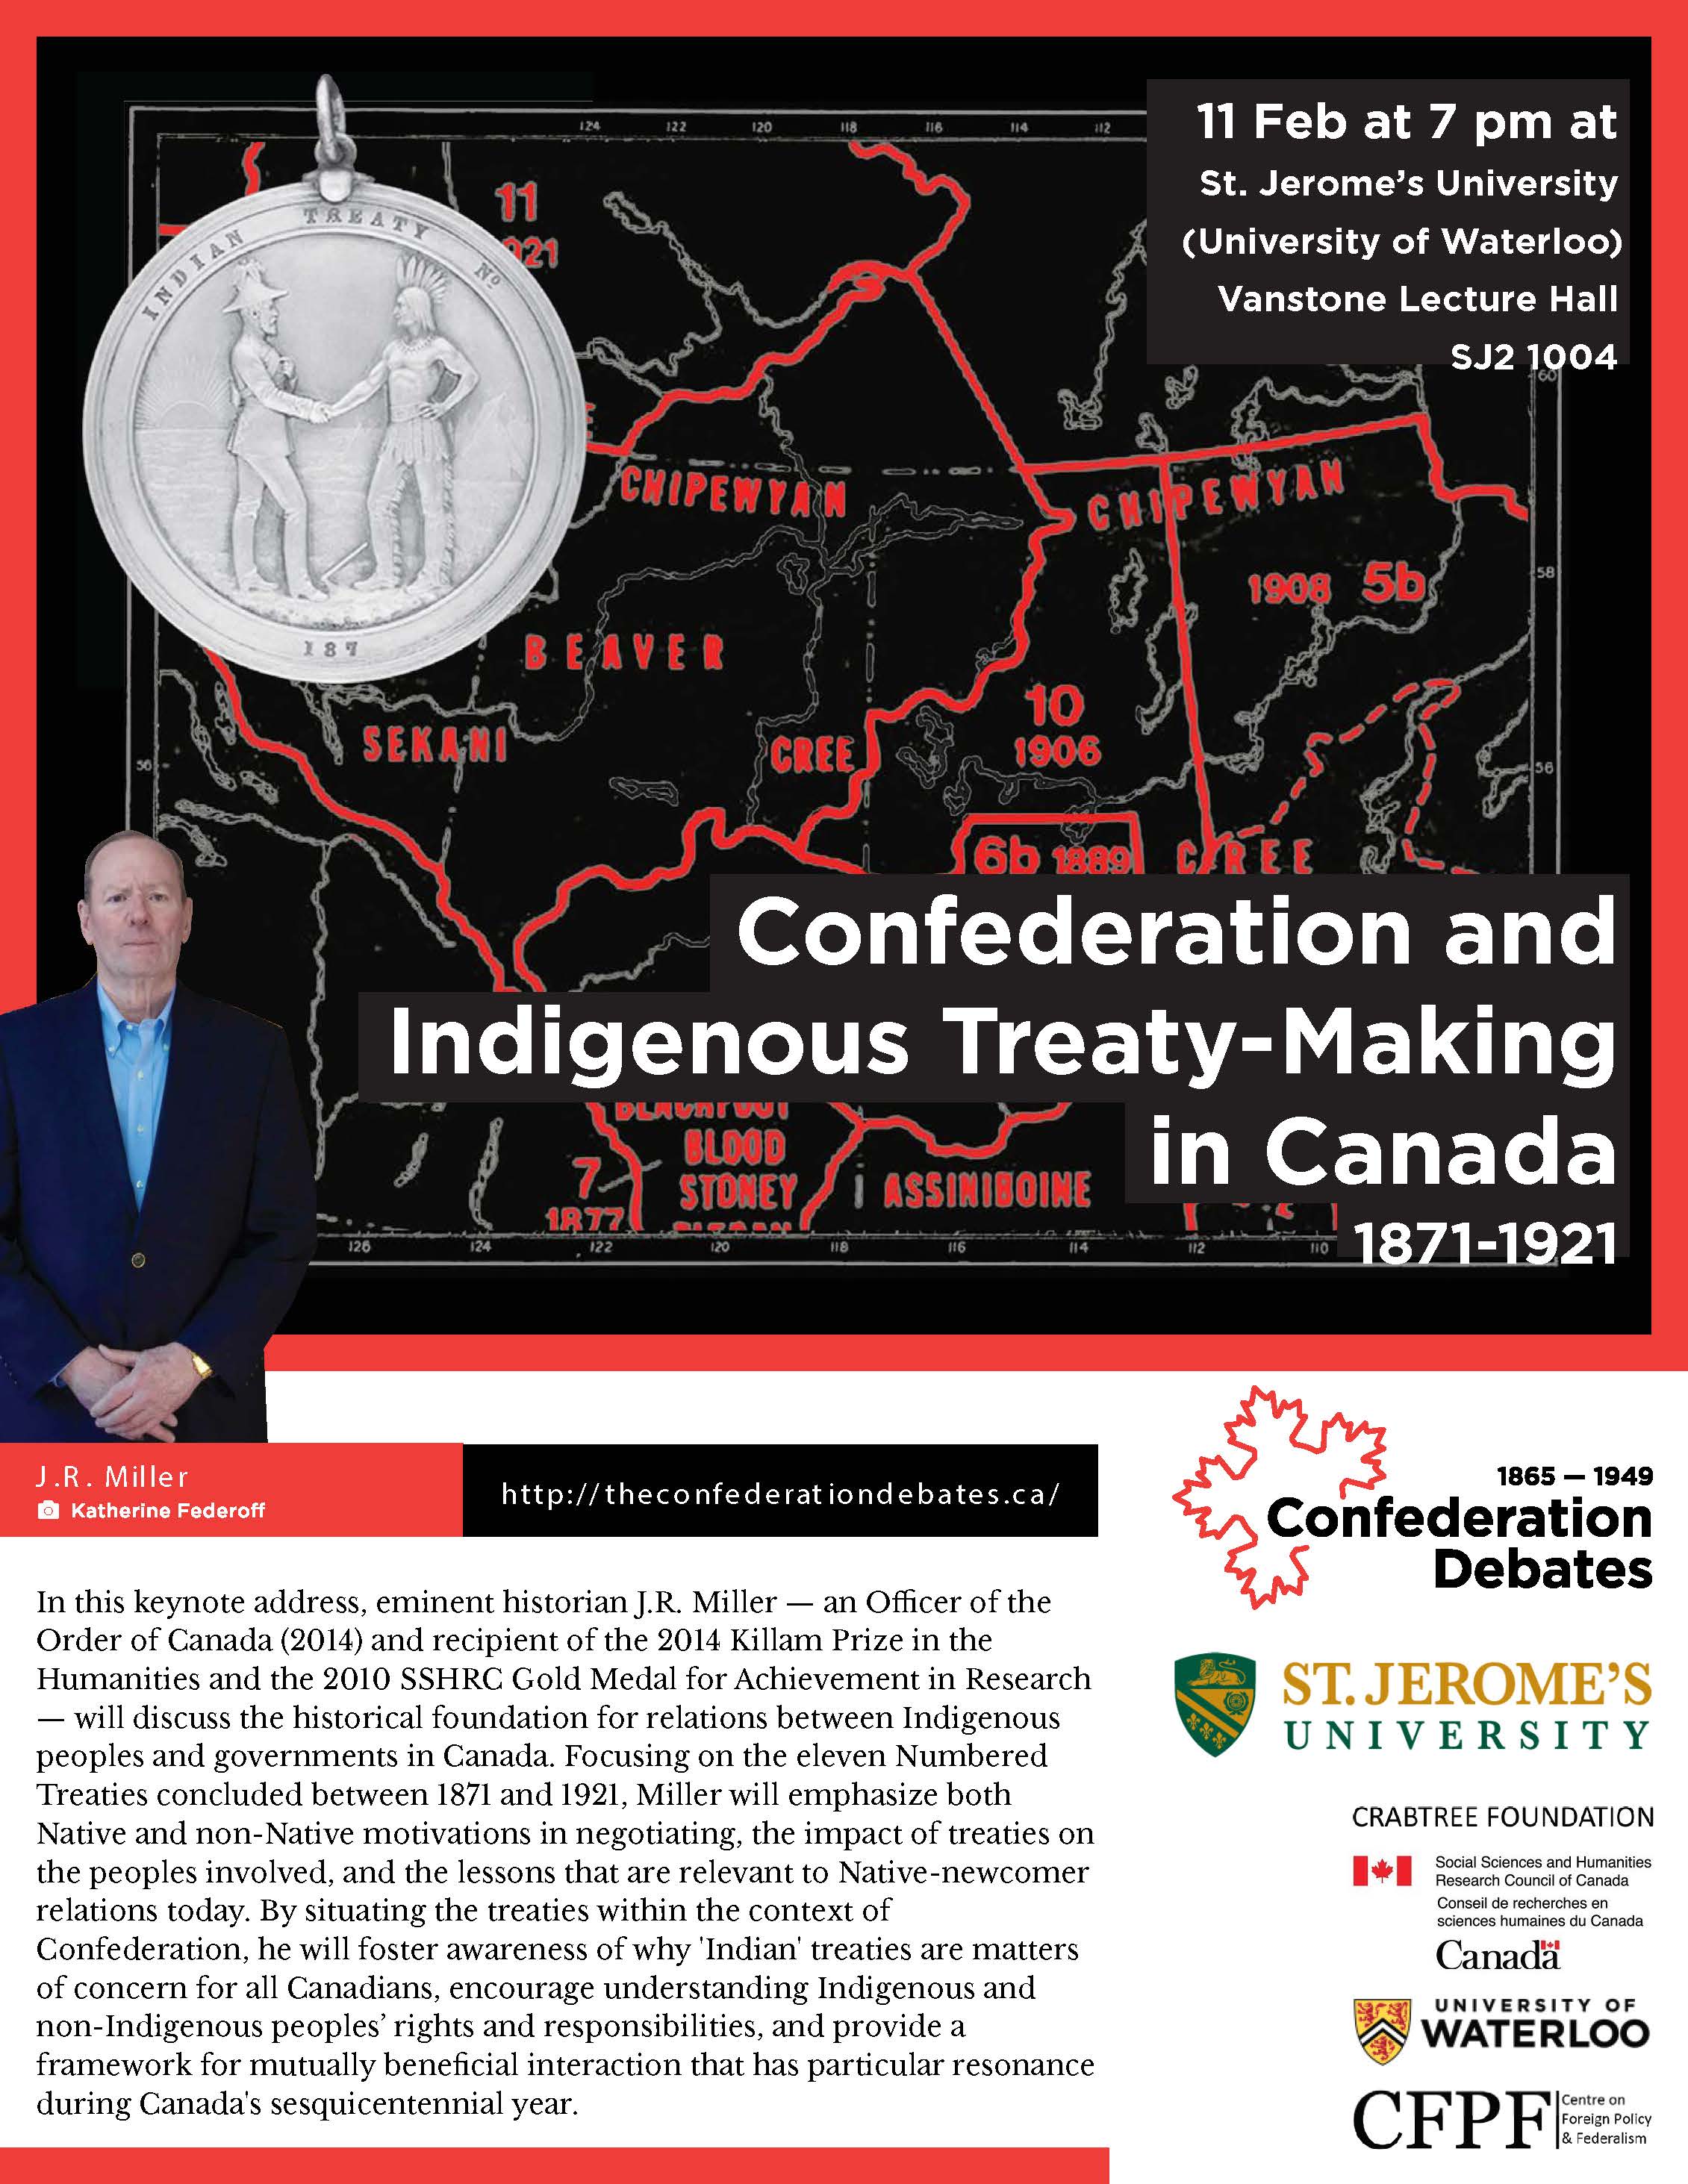 Conferderation and indigenous treaty-making canada